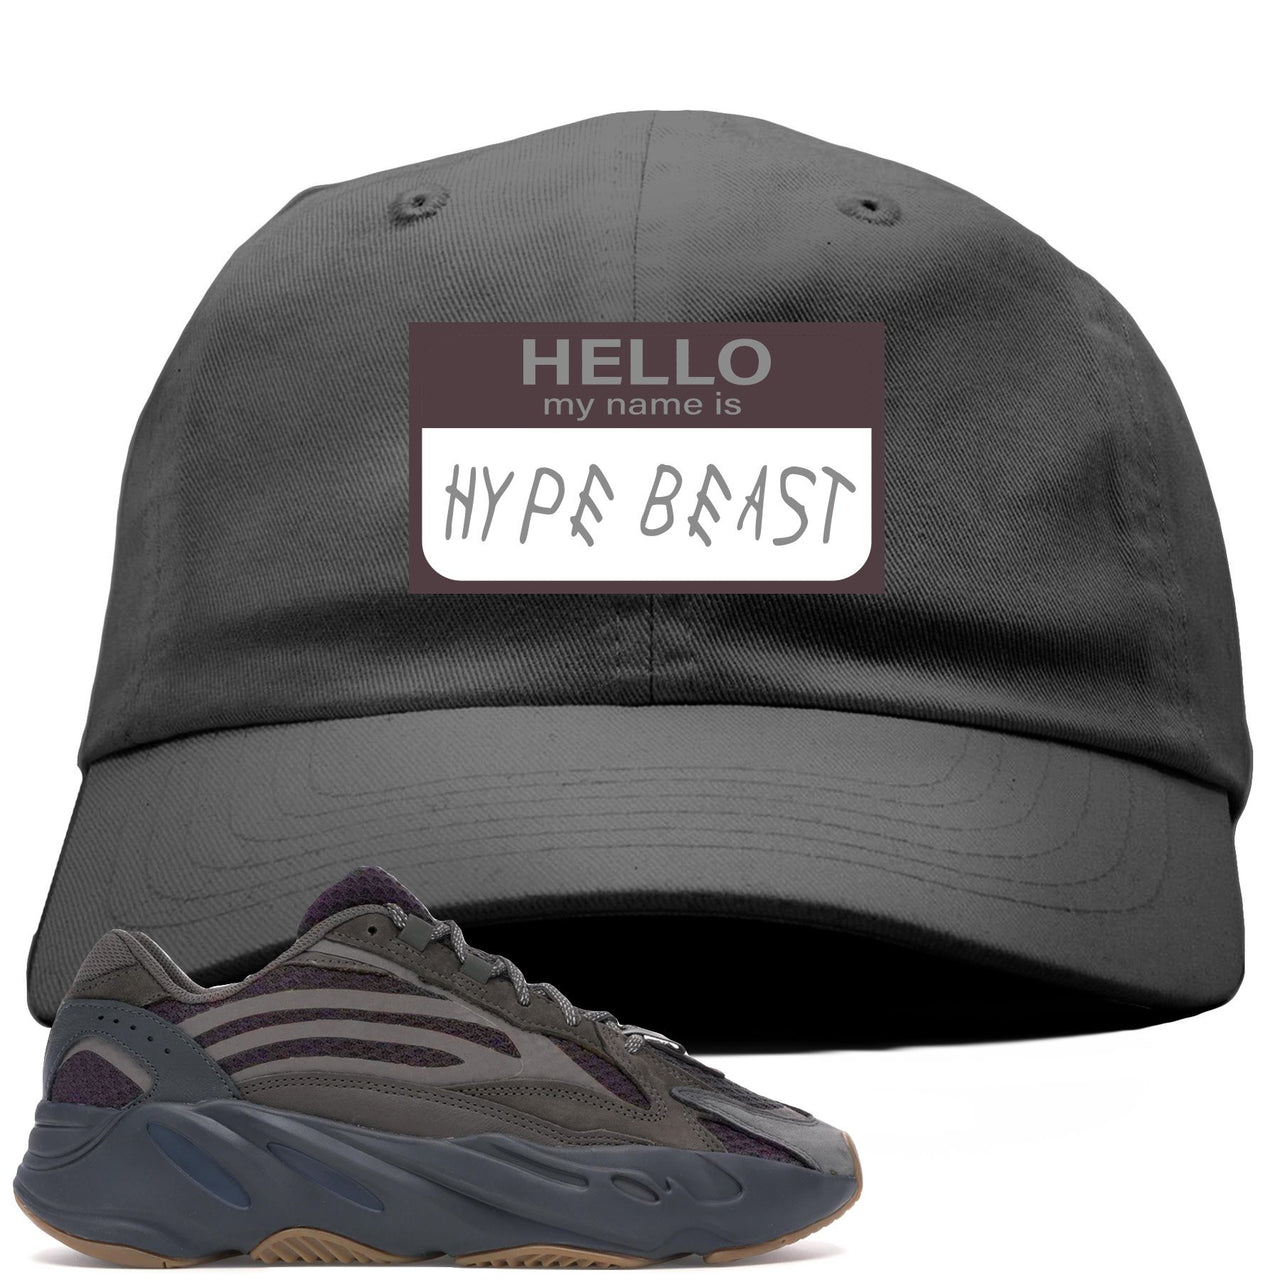 Geode 700s Dad Hat | Hello My Name Is Hype Beast Woe, Gray